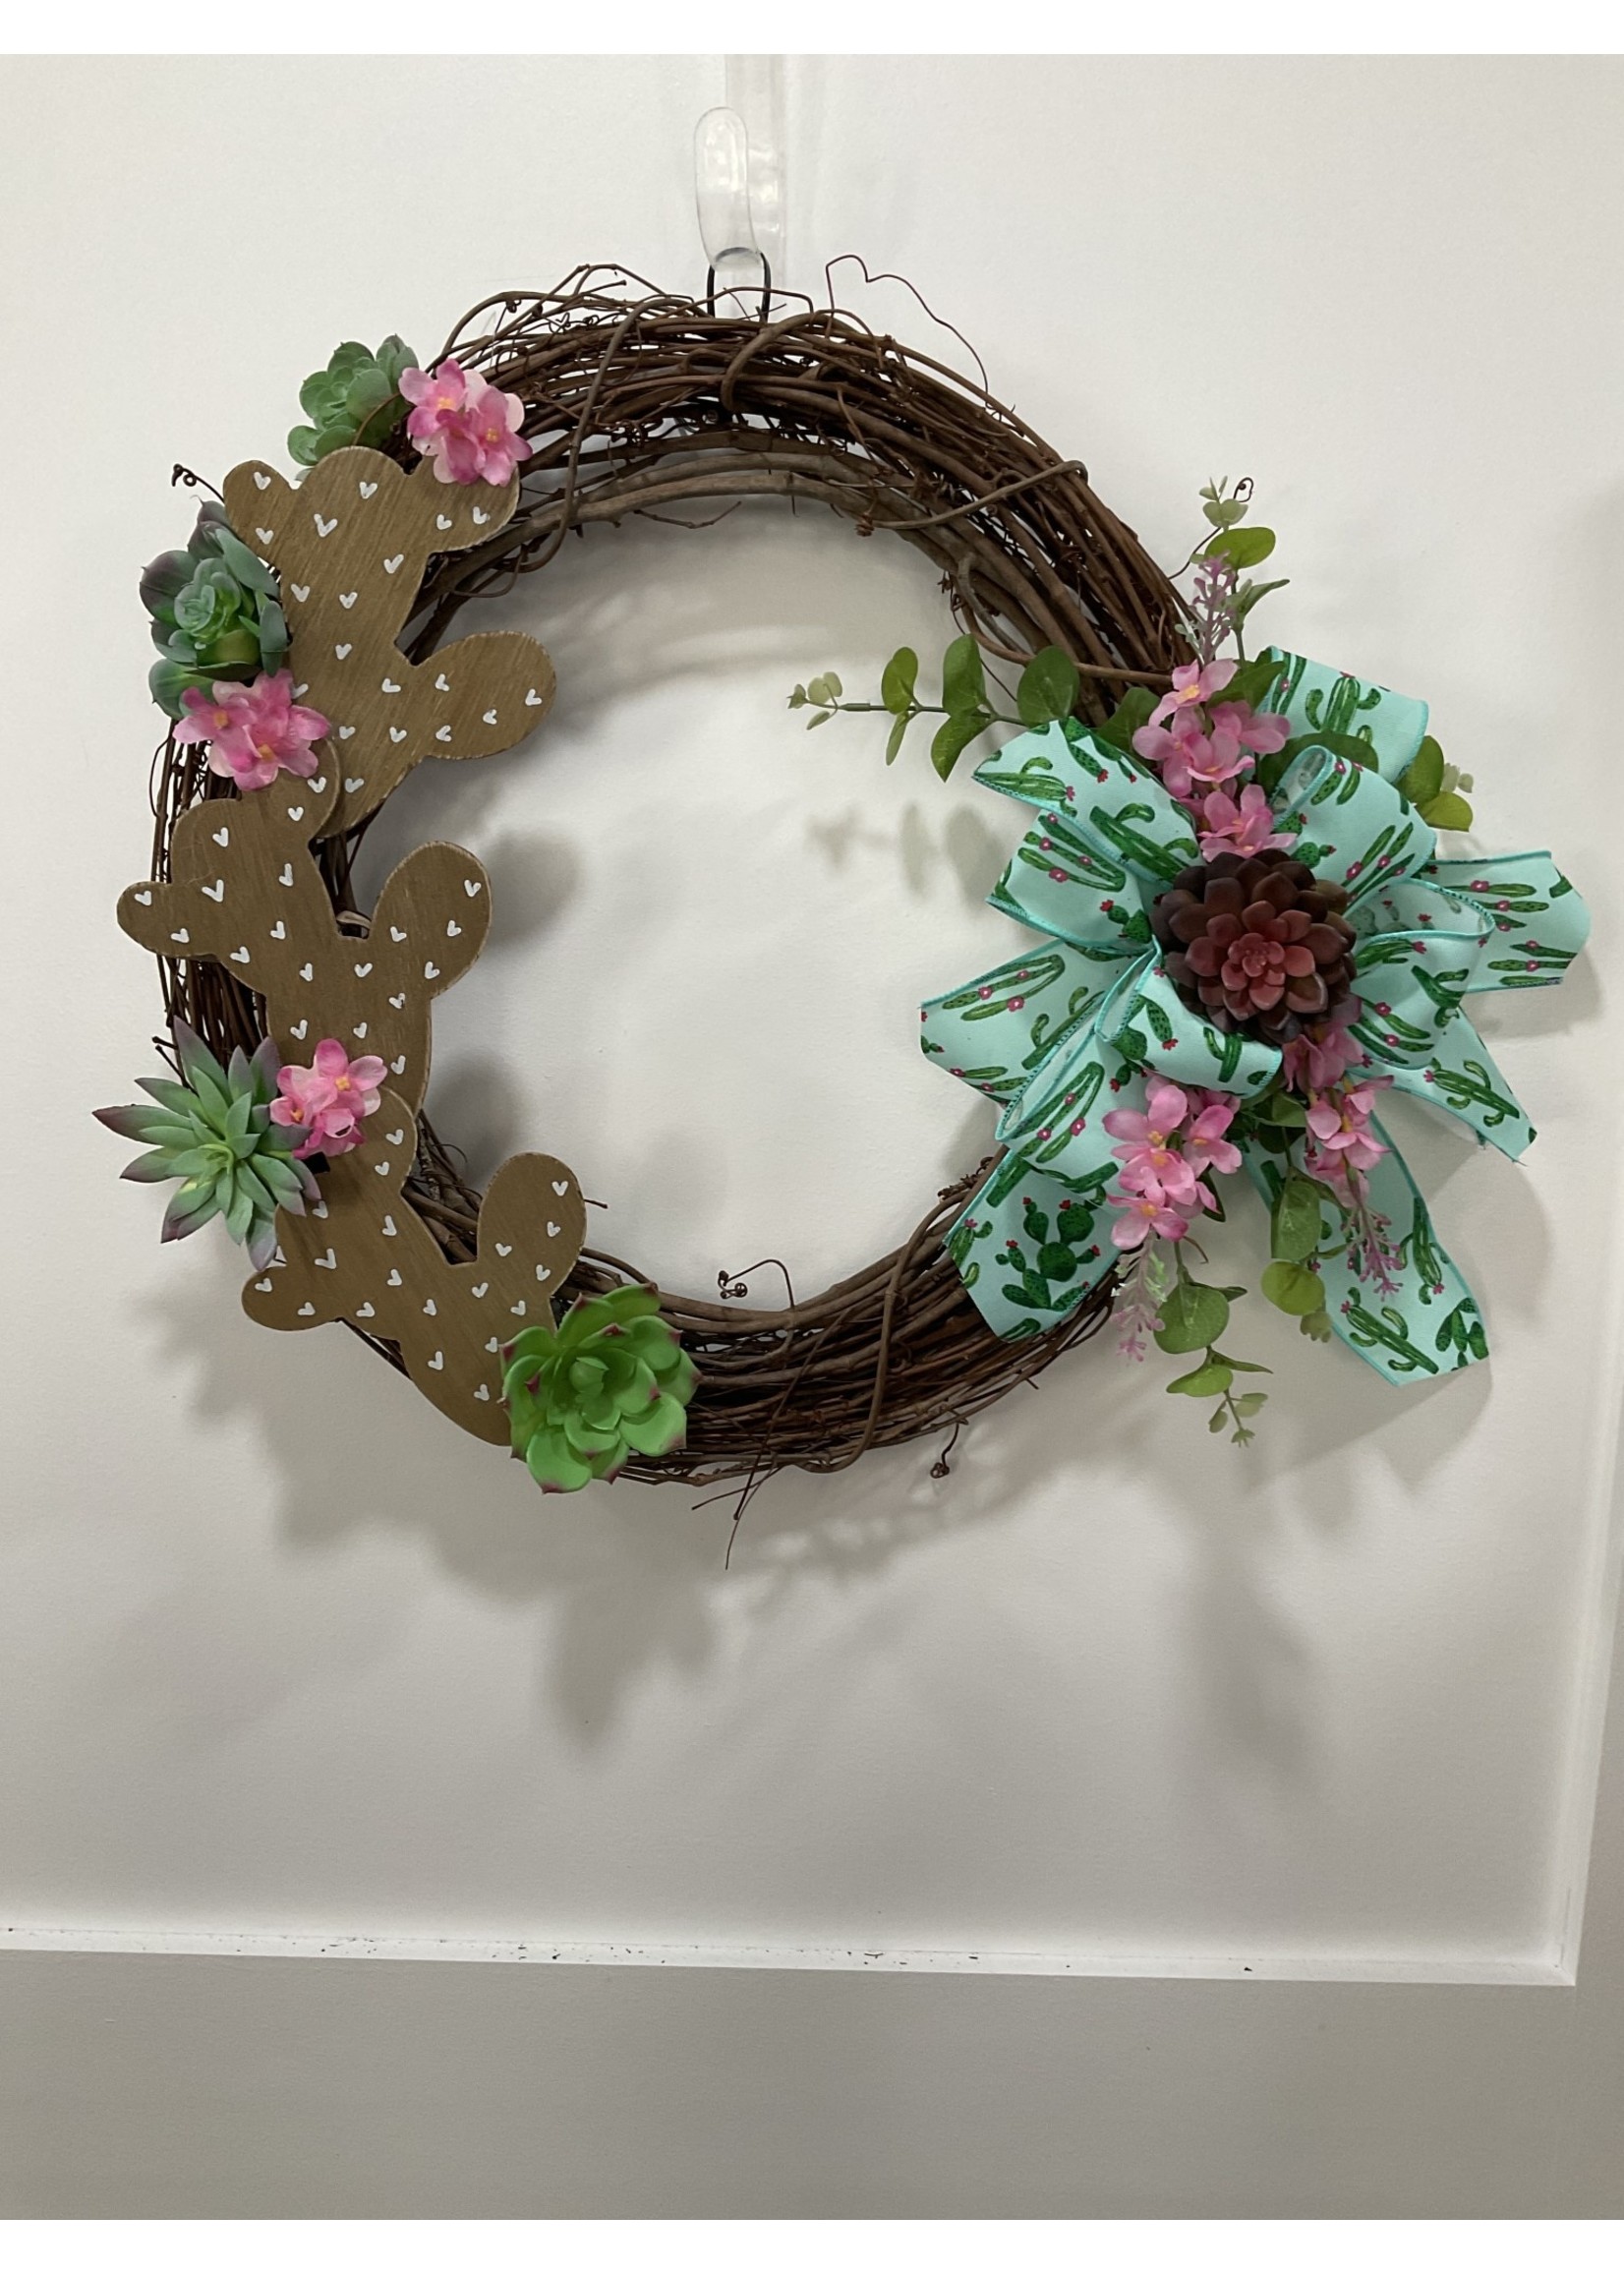 My New Favorite Thing Grapevine Wreath with Cactus, Dark Pink Flowers and Cactus Ribbon